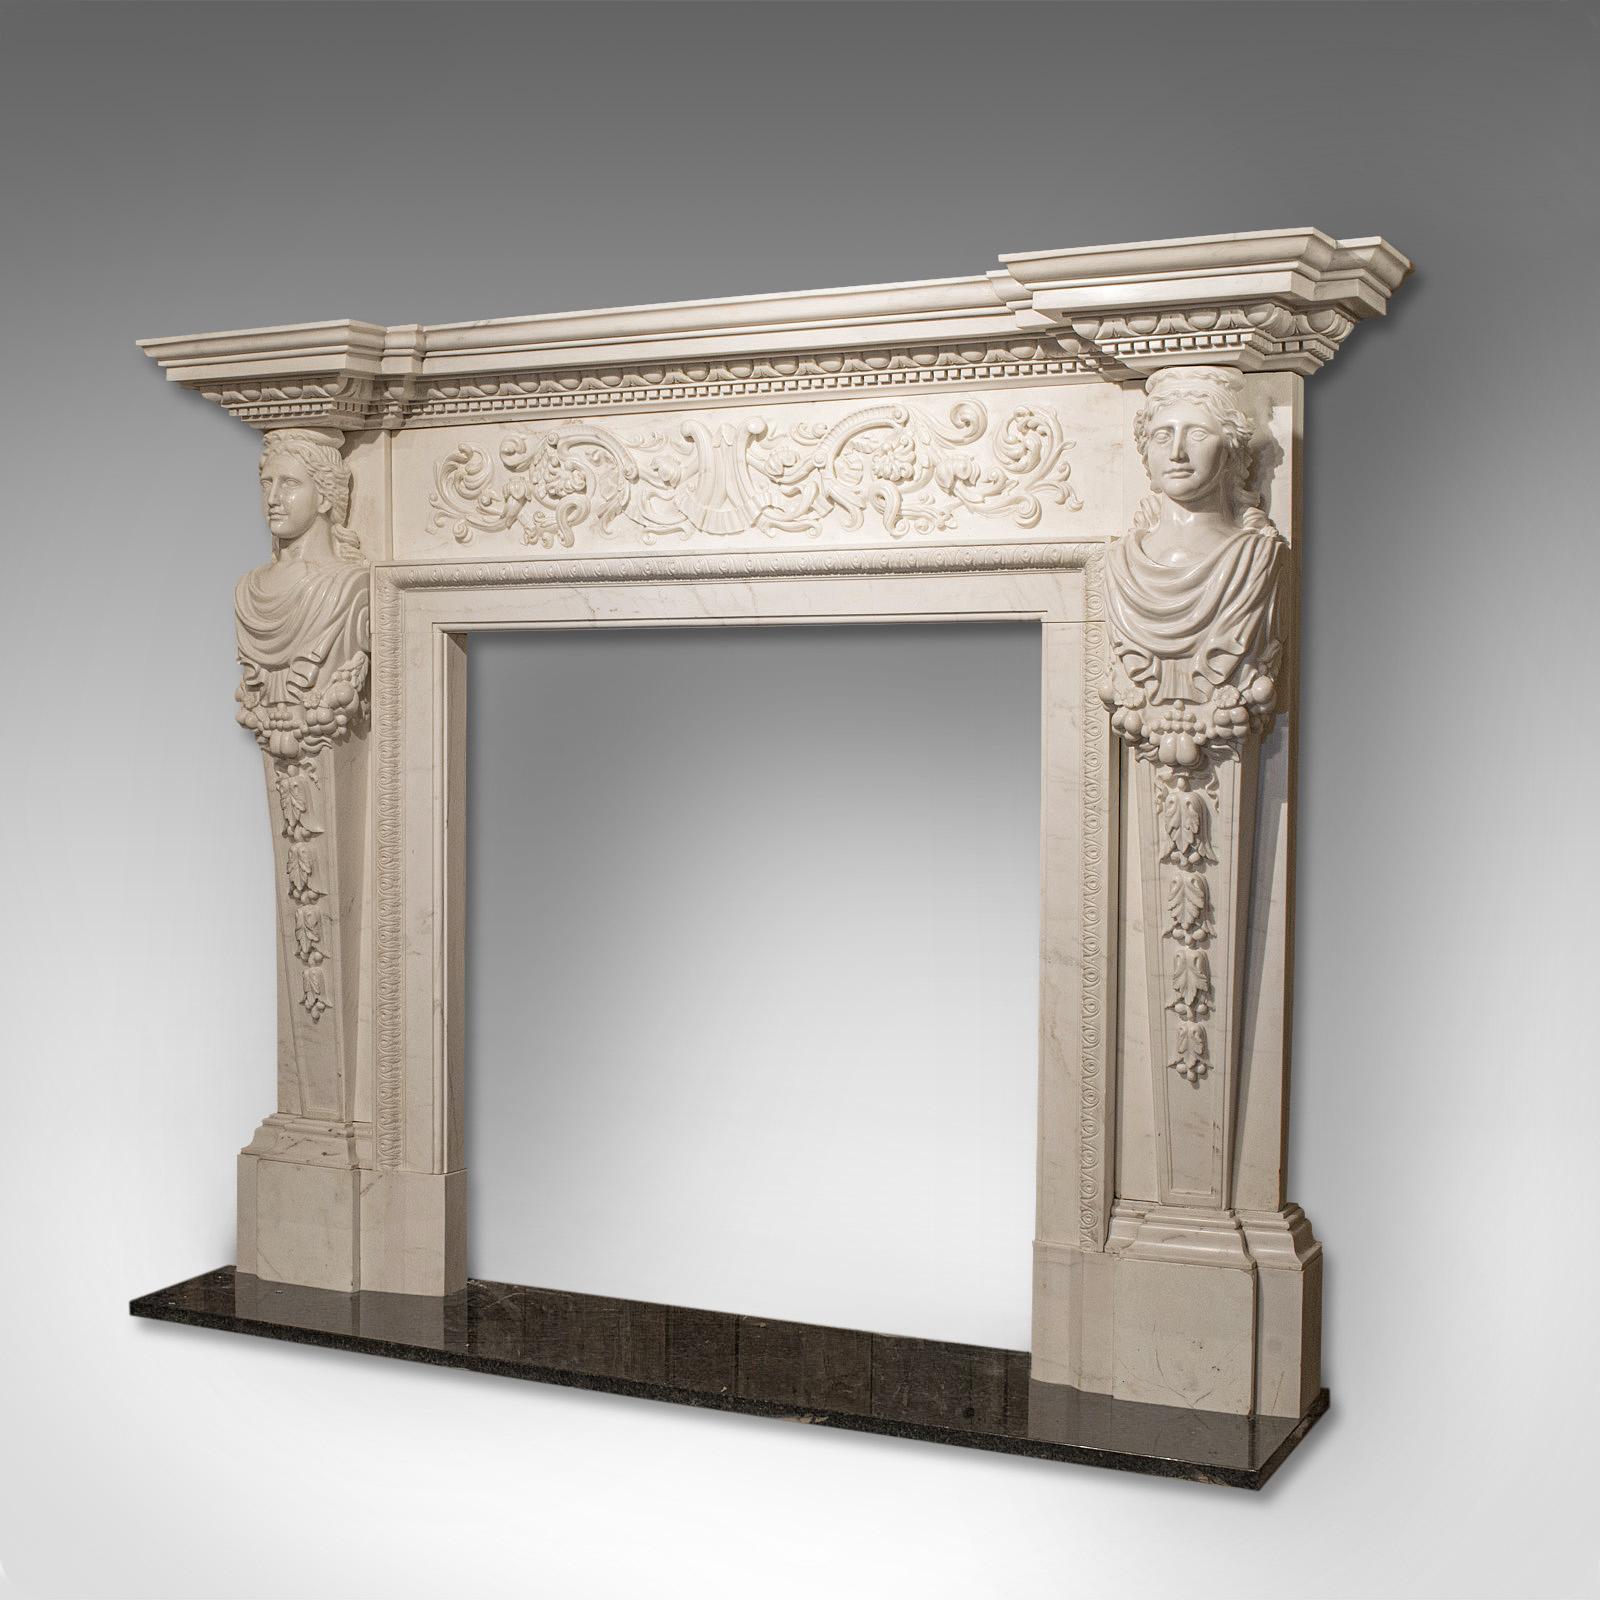 British Large Monumental Fireplace, English, Marble, Fire Surround, Neoclassical Taste For Sale